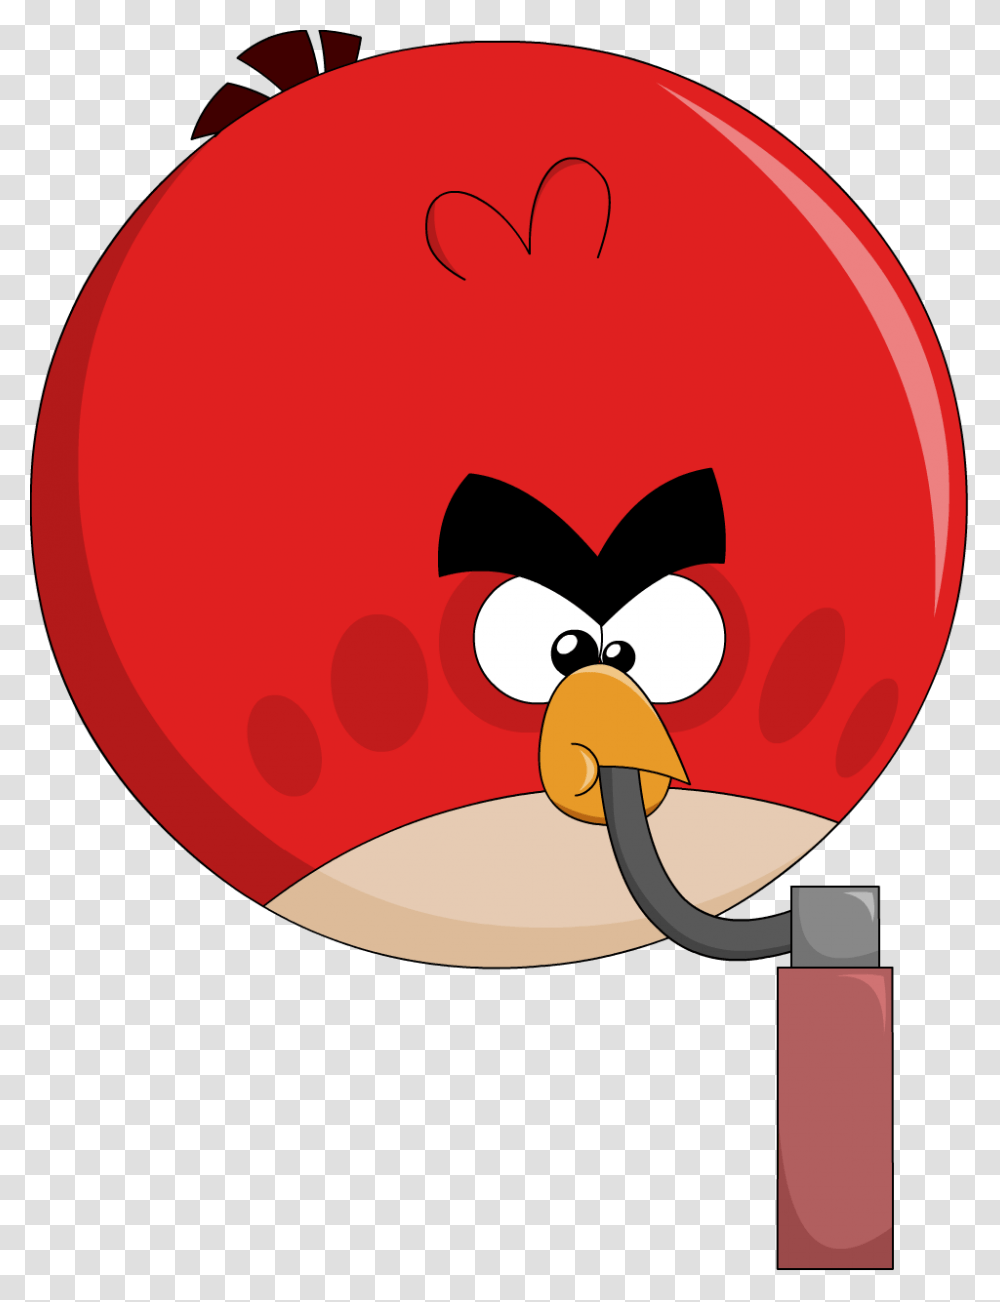 Angry Birds Stella Angry Birds Star Wars Angry Birds Stella Angry Birds Rio, Life Buoy, Label, Bomb Transparent Png